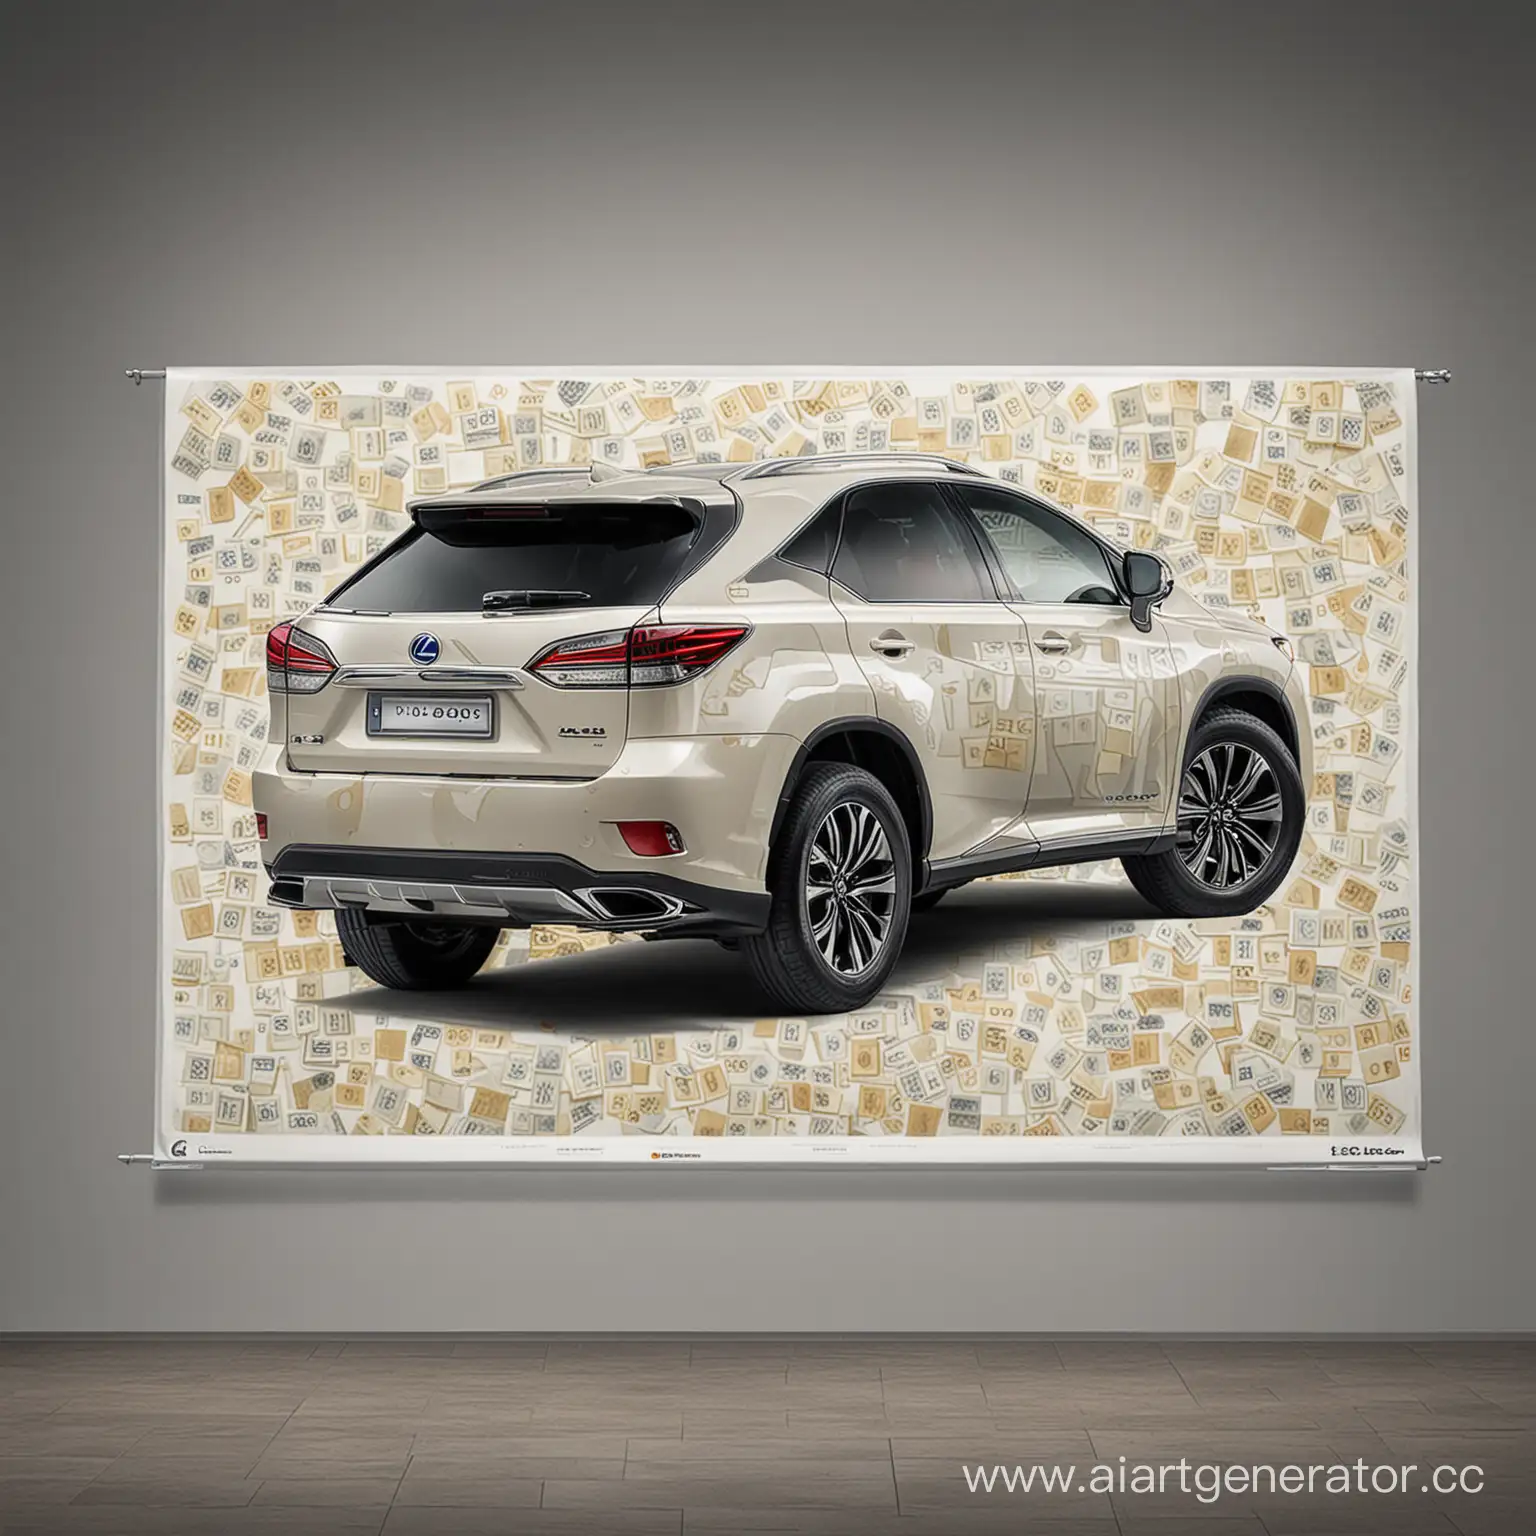 Save-Big-Get-1000000-Tenge-Off-on-Your-Lexus-RX350h-Purchase